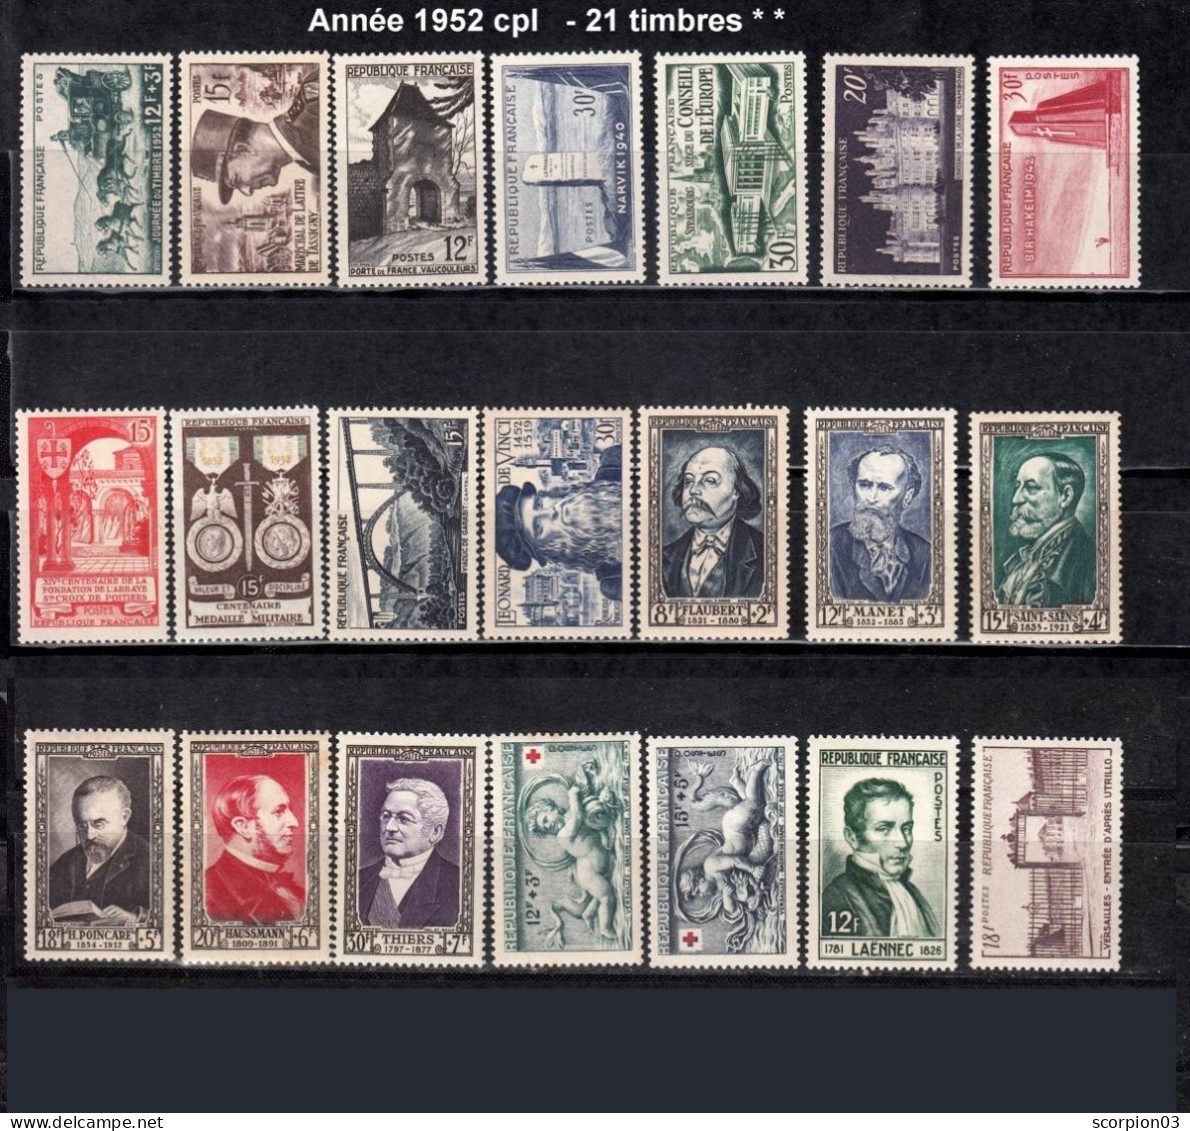 France Année Complete 1952 -21 Timbres* * TB - 1950-1959